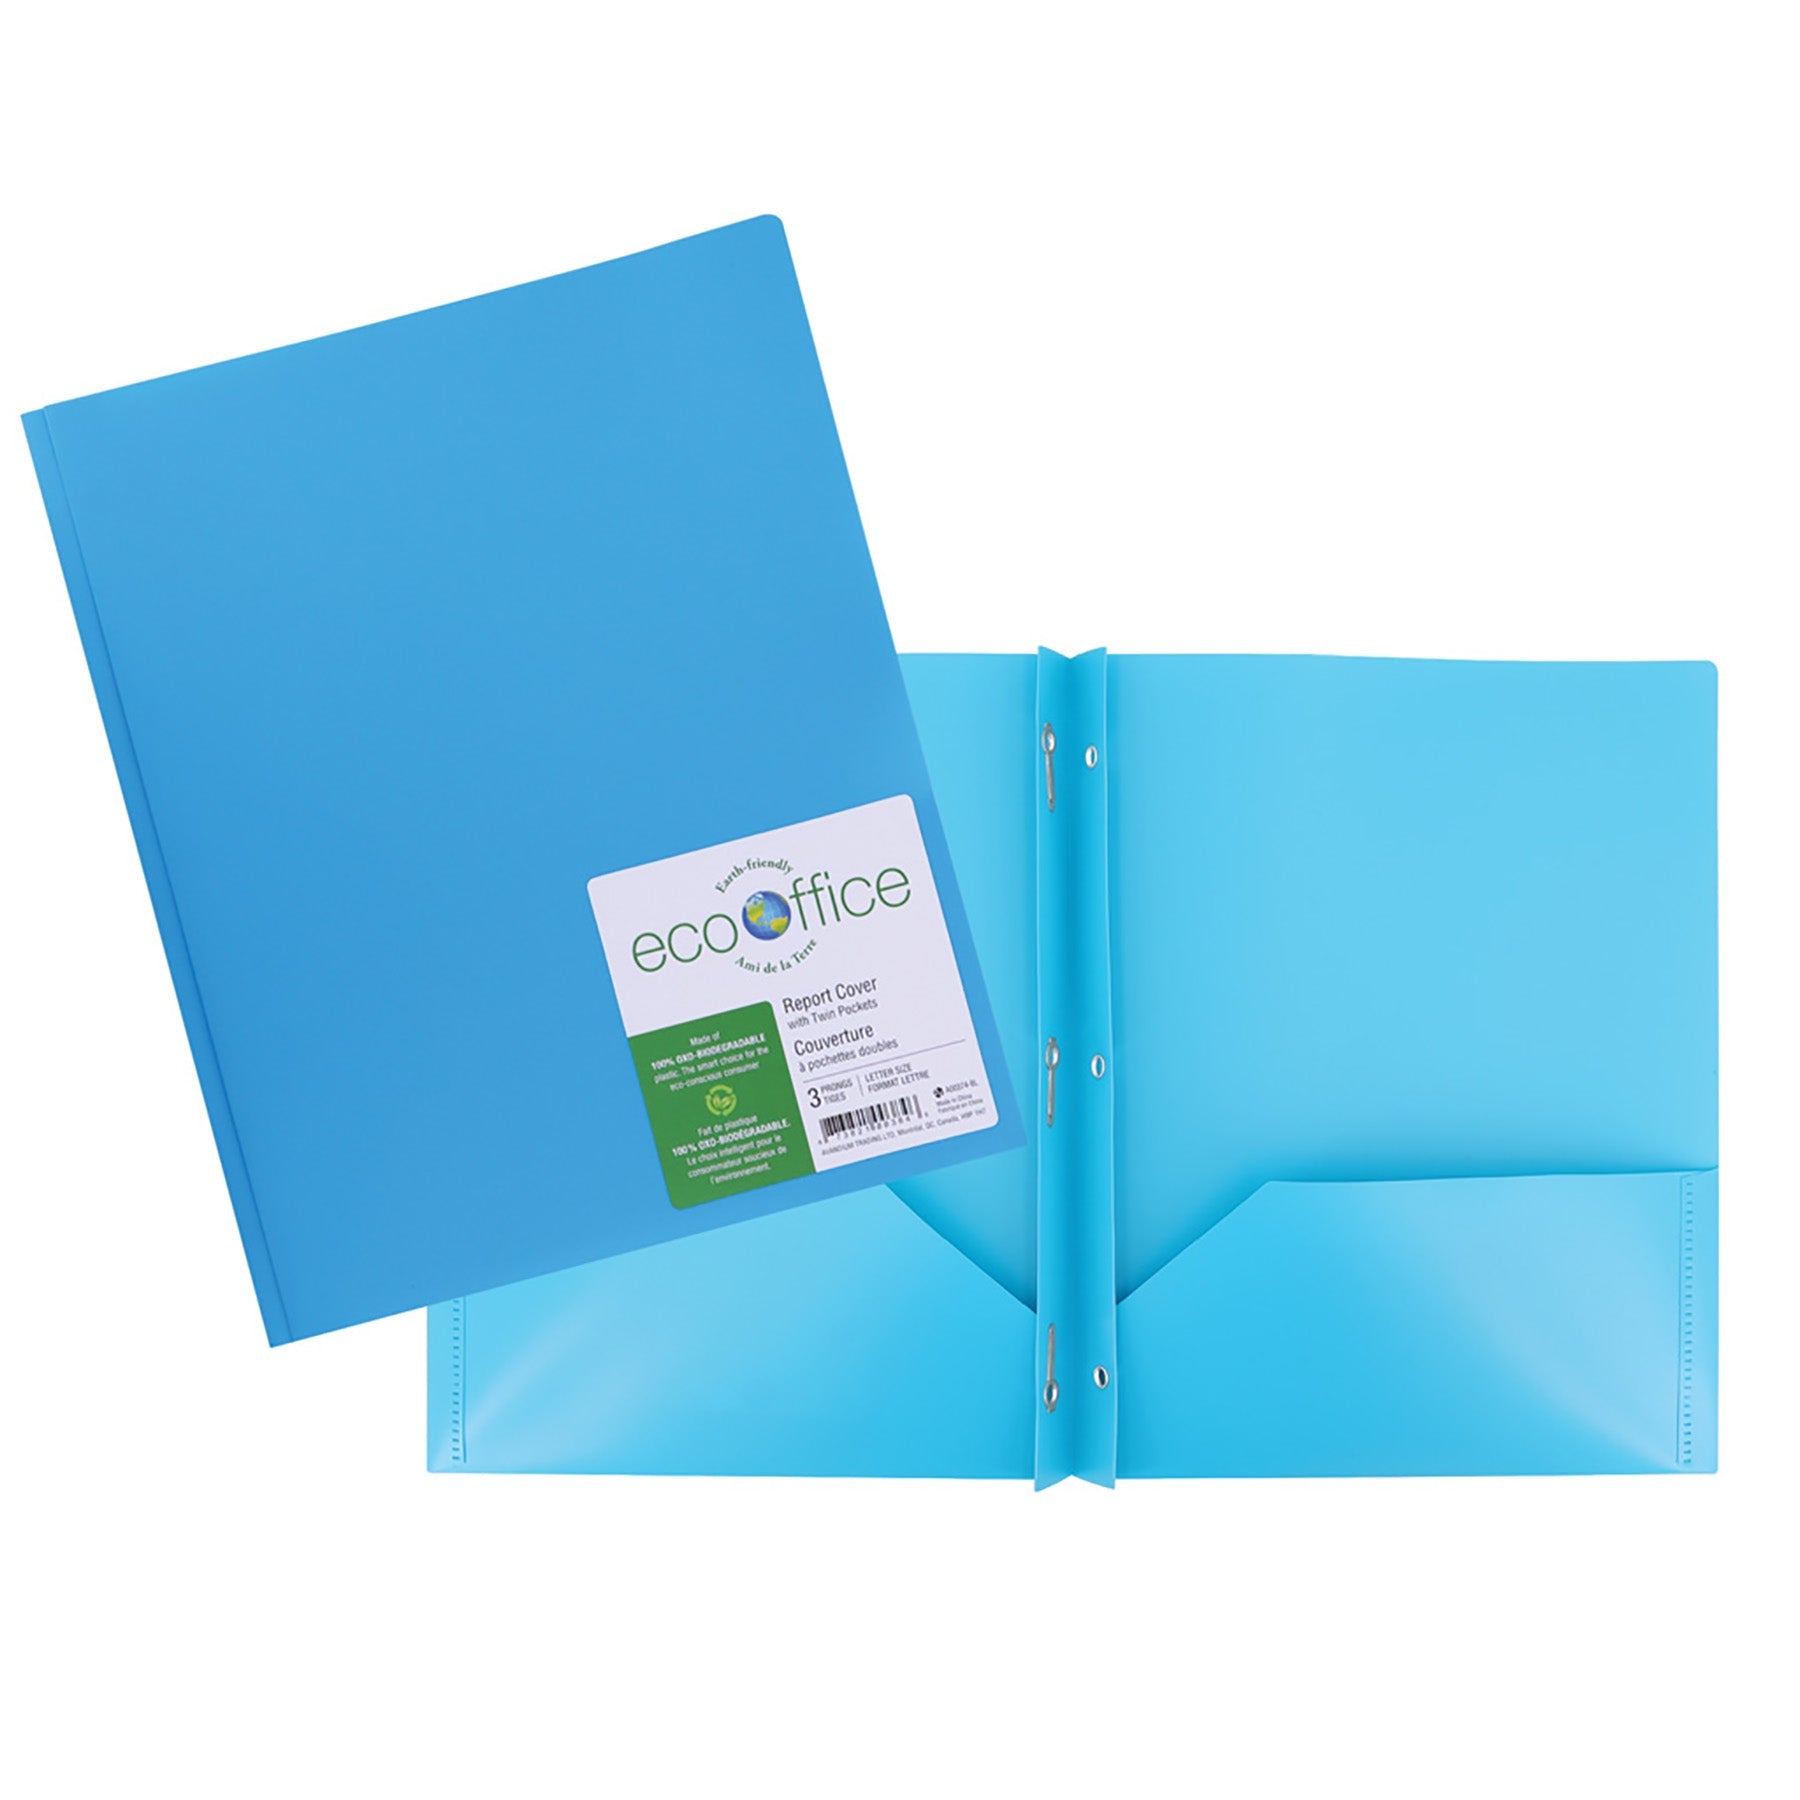 EcoOffice 3-Prong Report Cover 2 Pockets Blue Plastic 11.25x9.25in